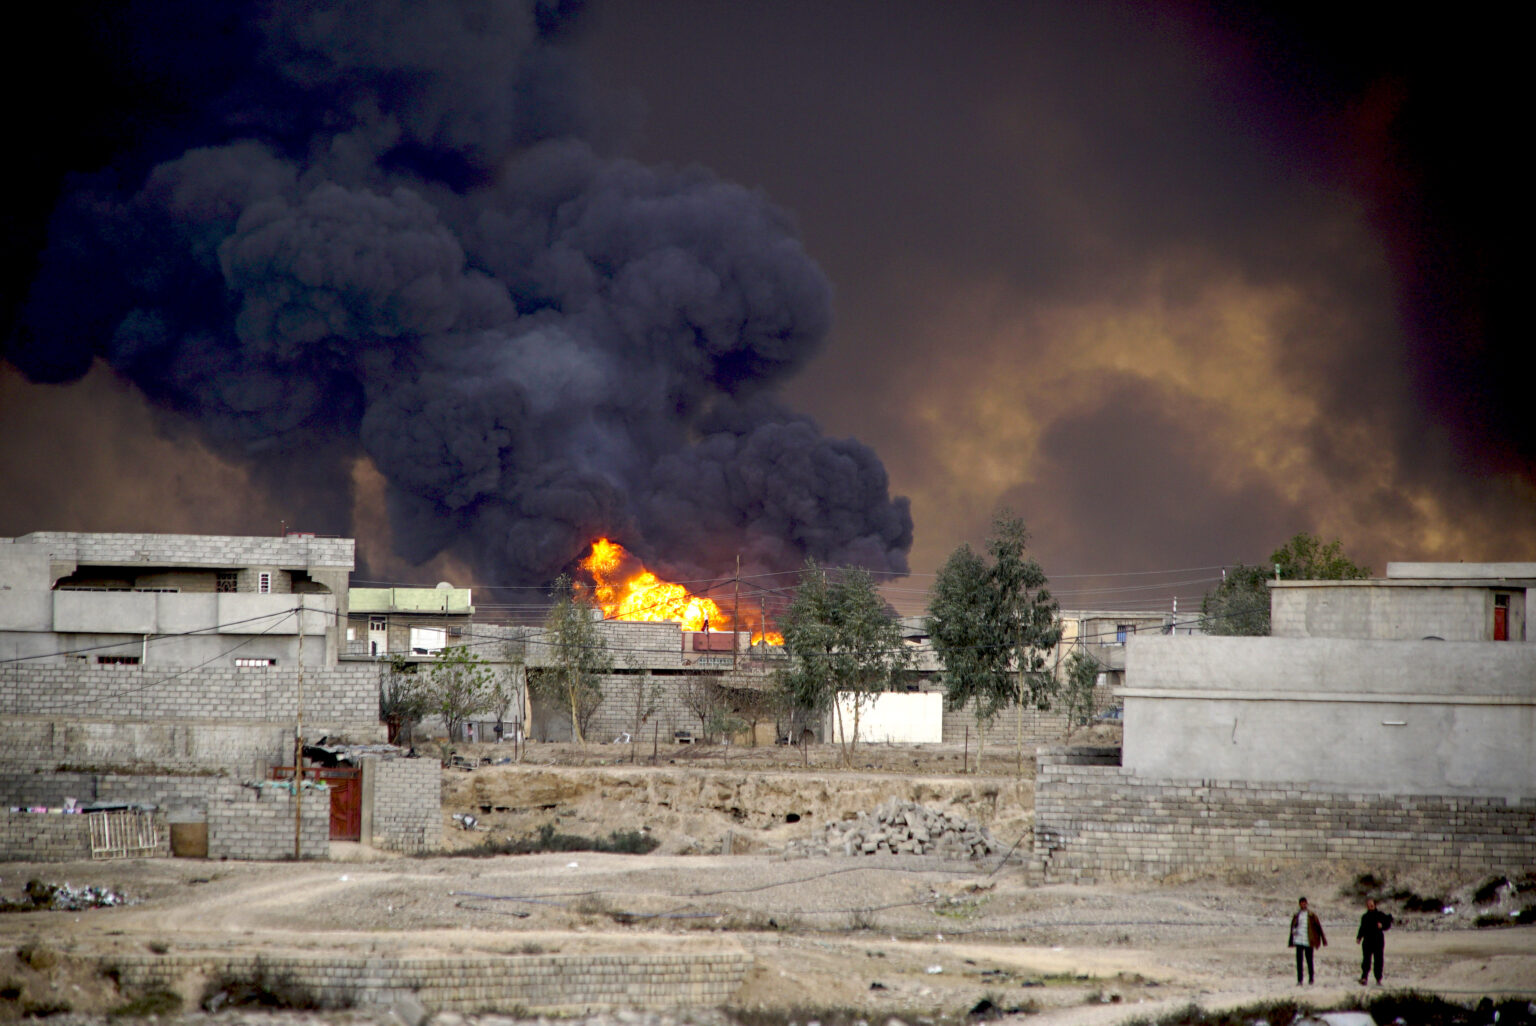 Qayyarah town on fire, in the Mosul District of northern Iraq, Nov. 2016. (Mstyslav Chernov, CC BY-SA 4.0, Wikimedia Commons)